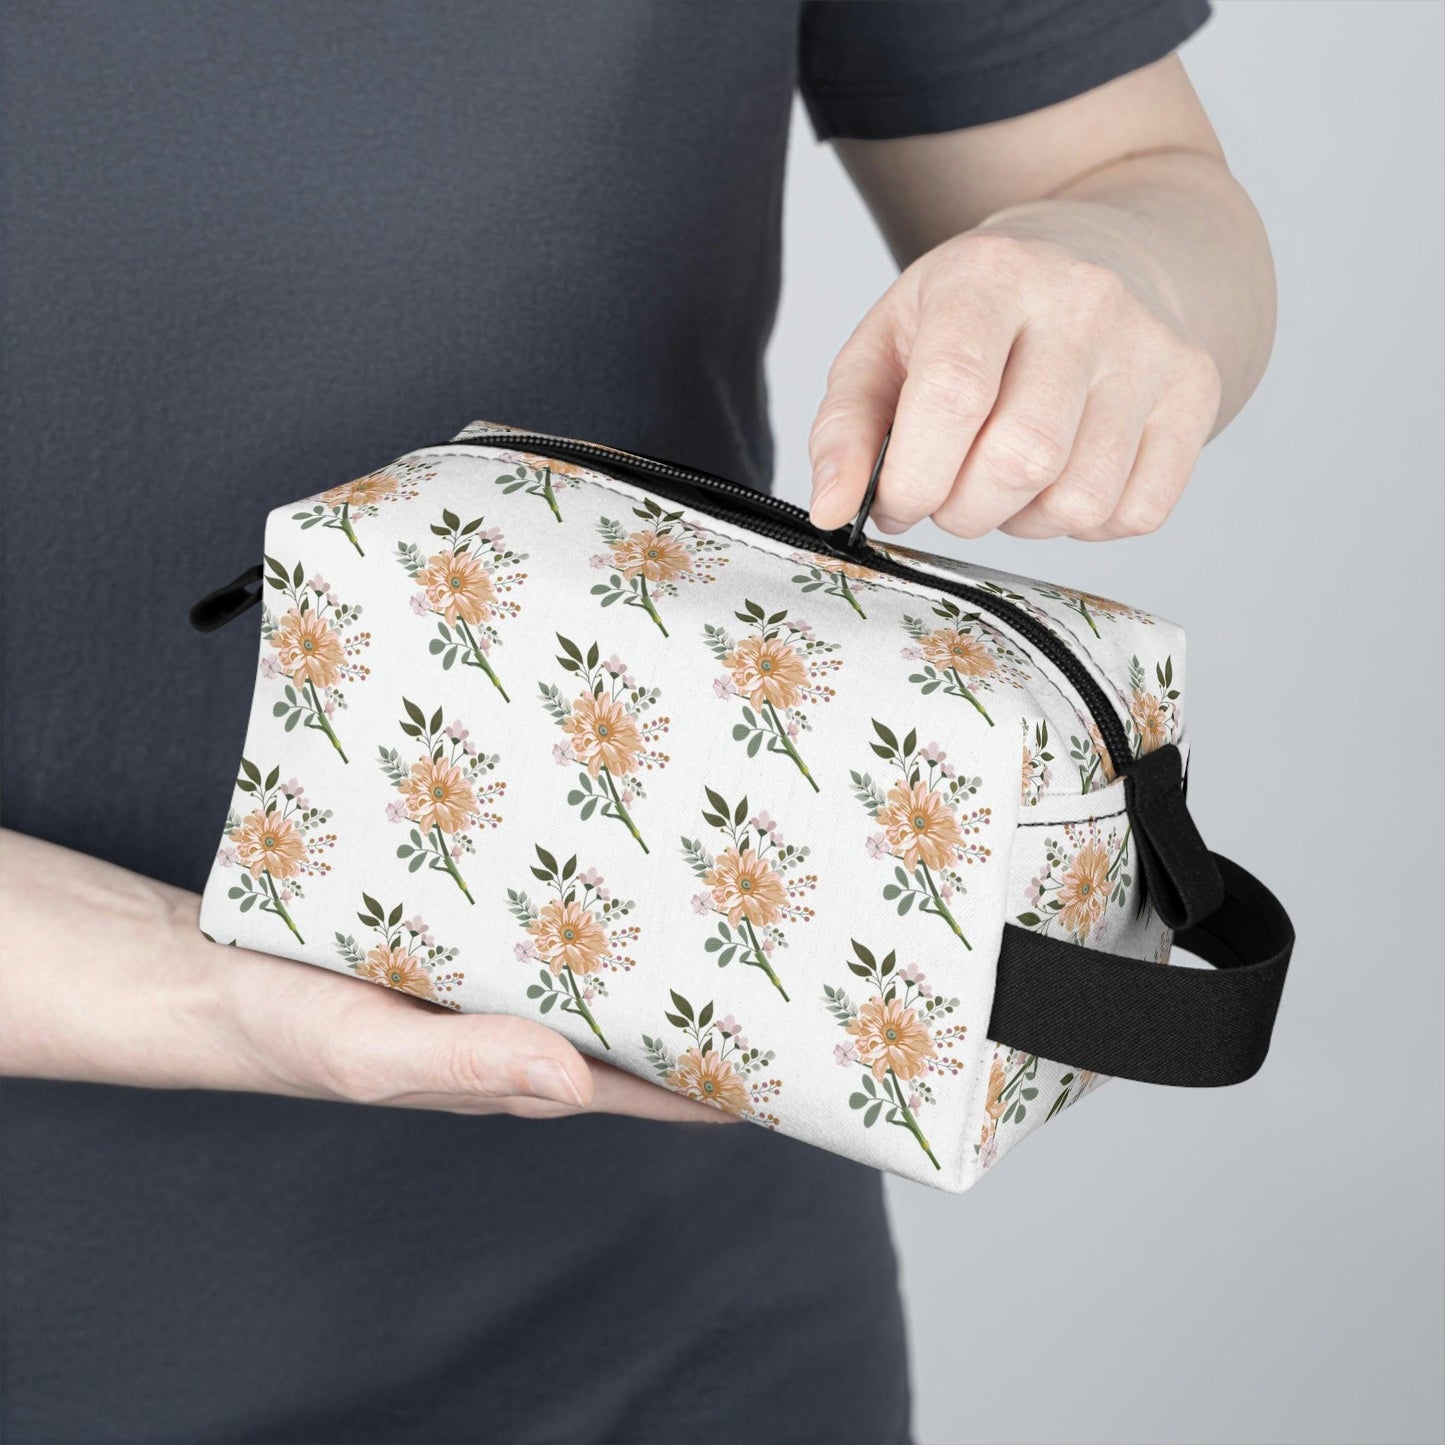 Floral Makeup Bag | Cosmetic Bag Travel Bag | flower makeup bag floral Toiletry Bag | makeup bags | makeup pouch makeup bag for travelling - Giftsmojo